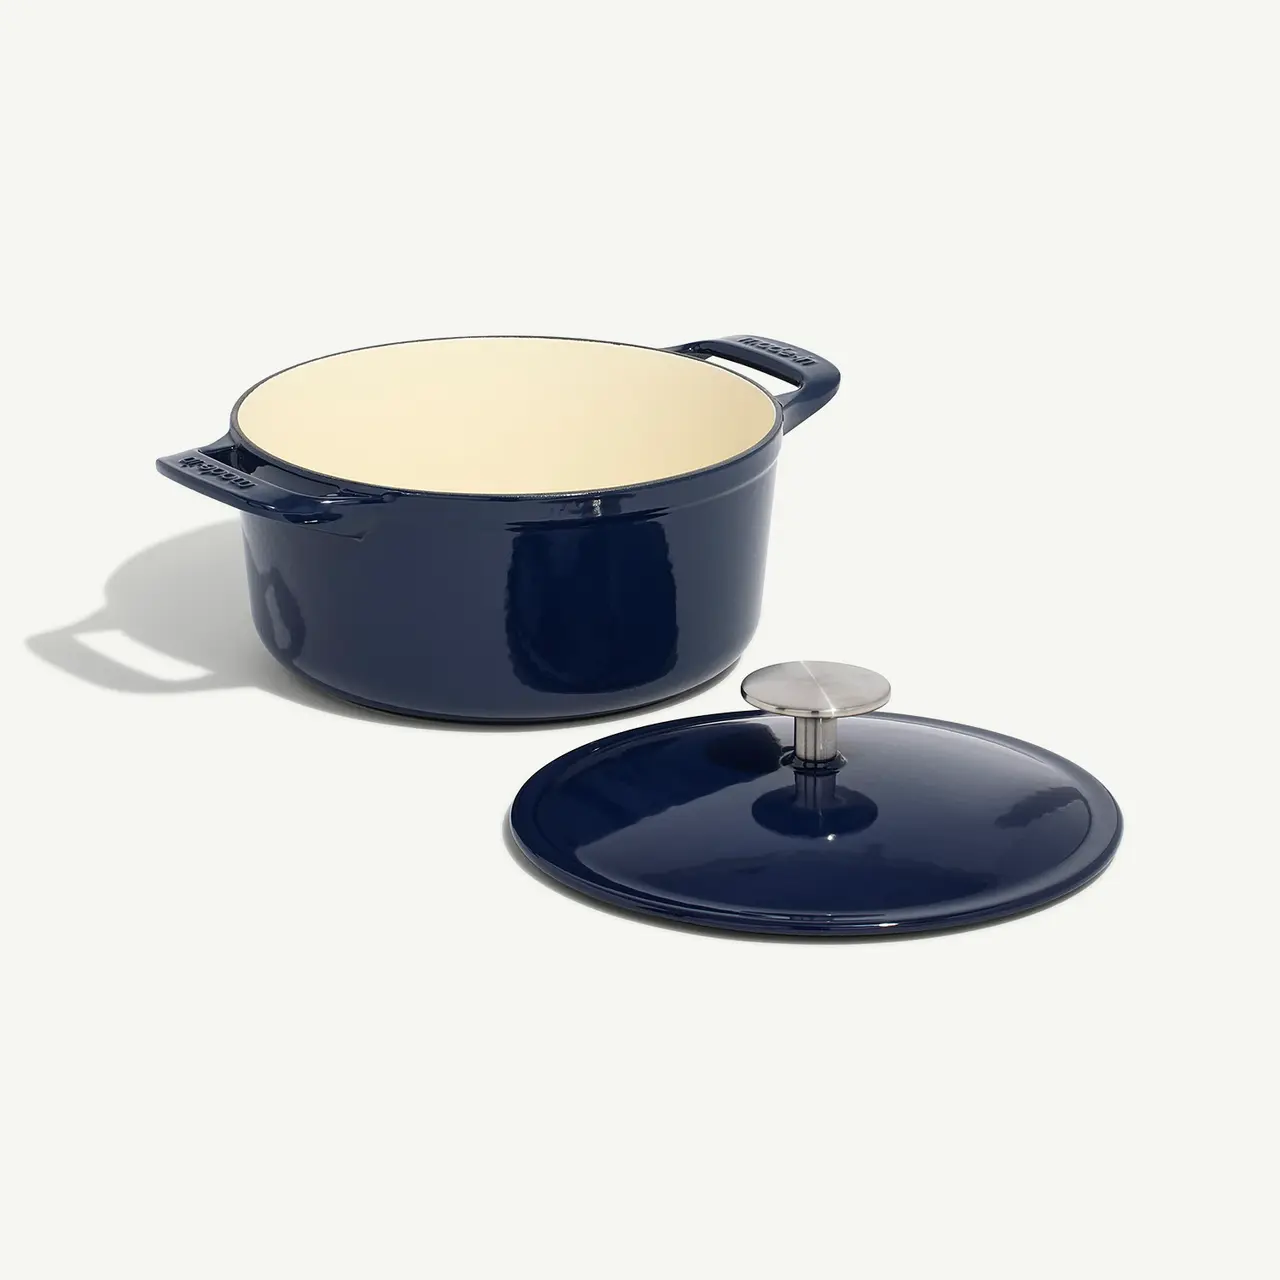 A navy blue enameled Dutch oven with its lid placed to the side on a light background.